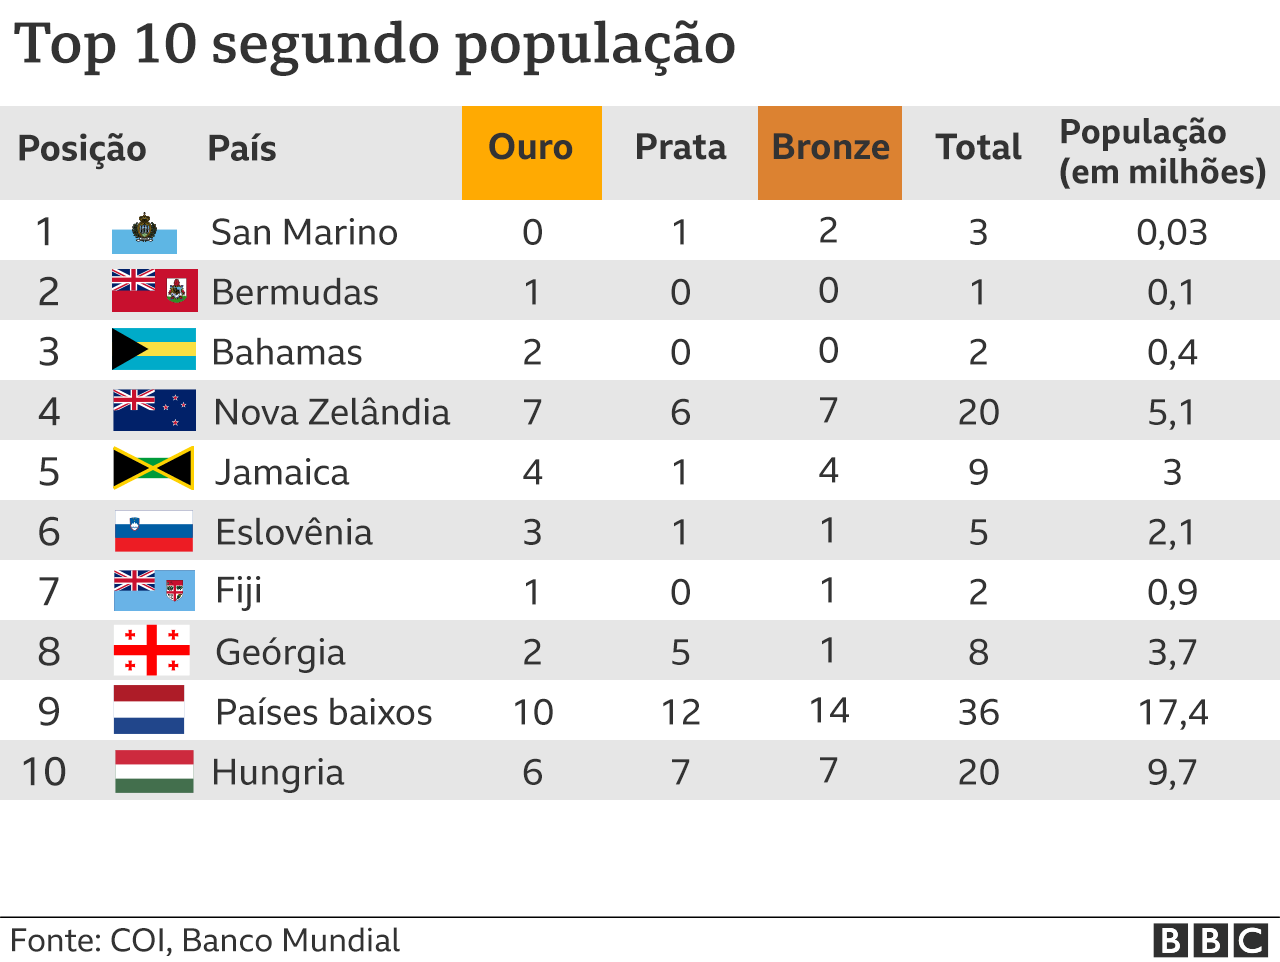 The table shows the medal table by population